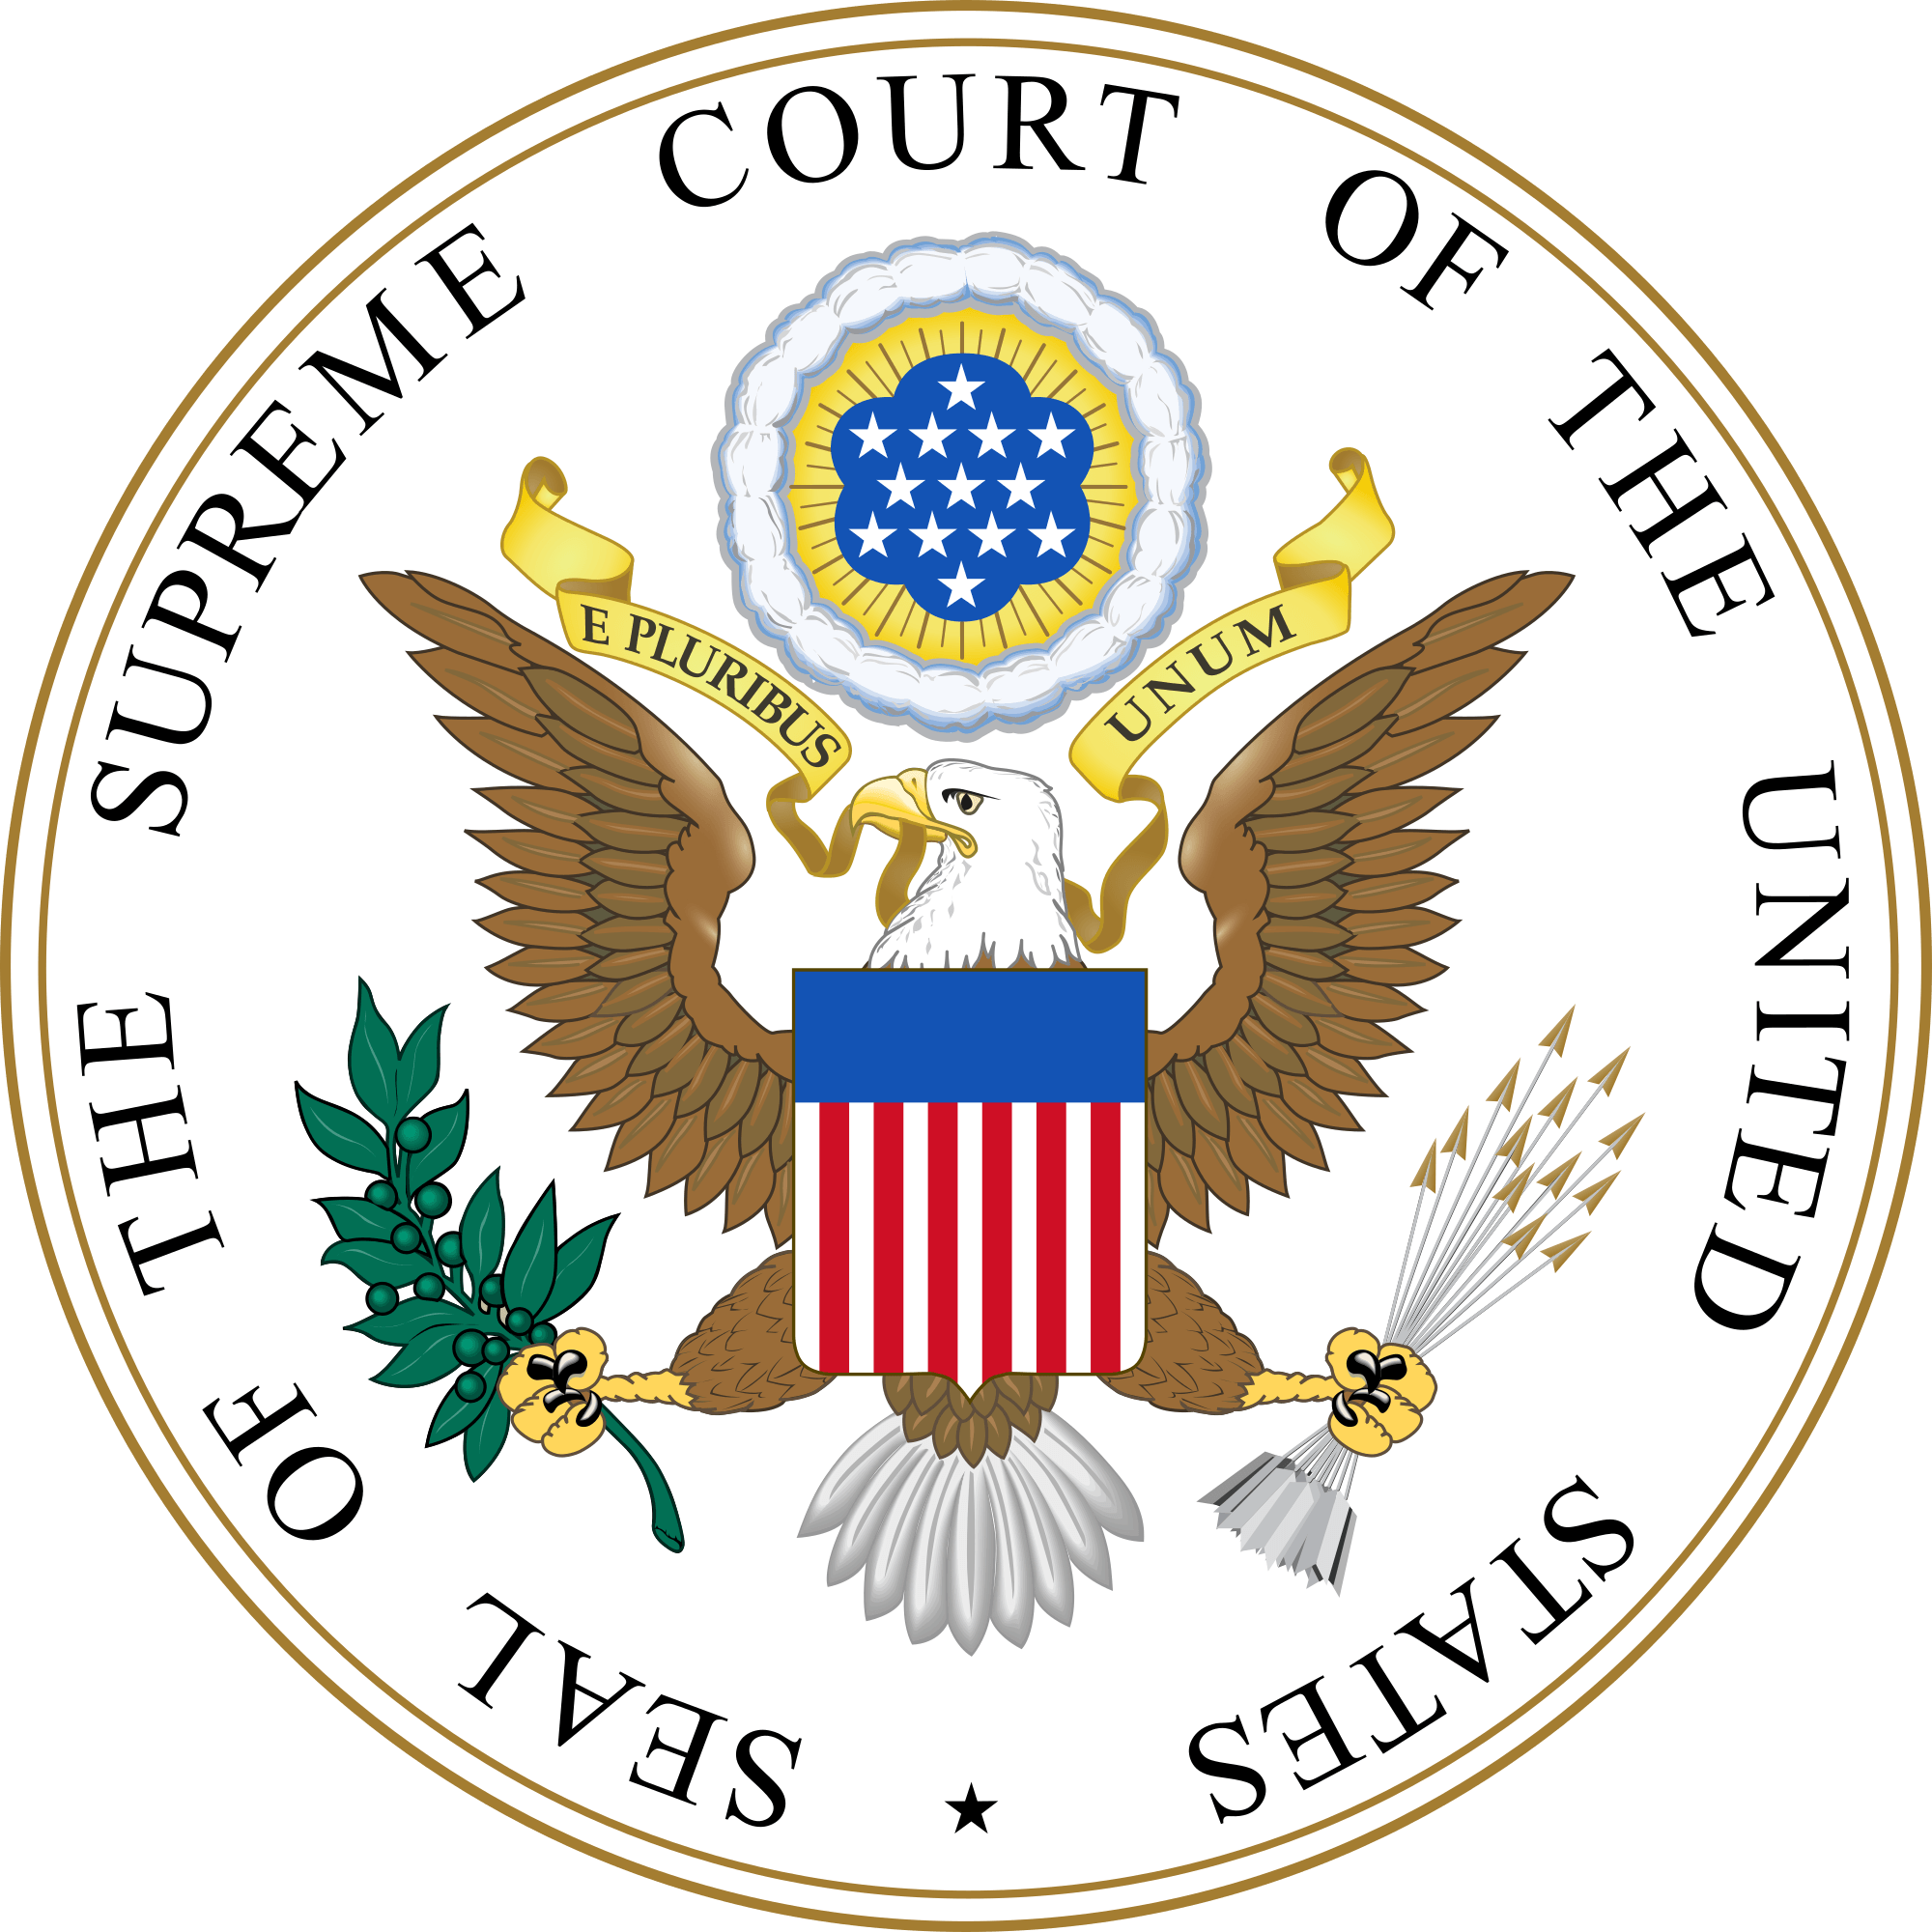 SCOTUS Logo - File:Seal of the United States Supreme Court.svg - Wikimedia Commons